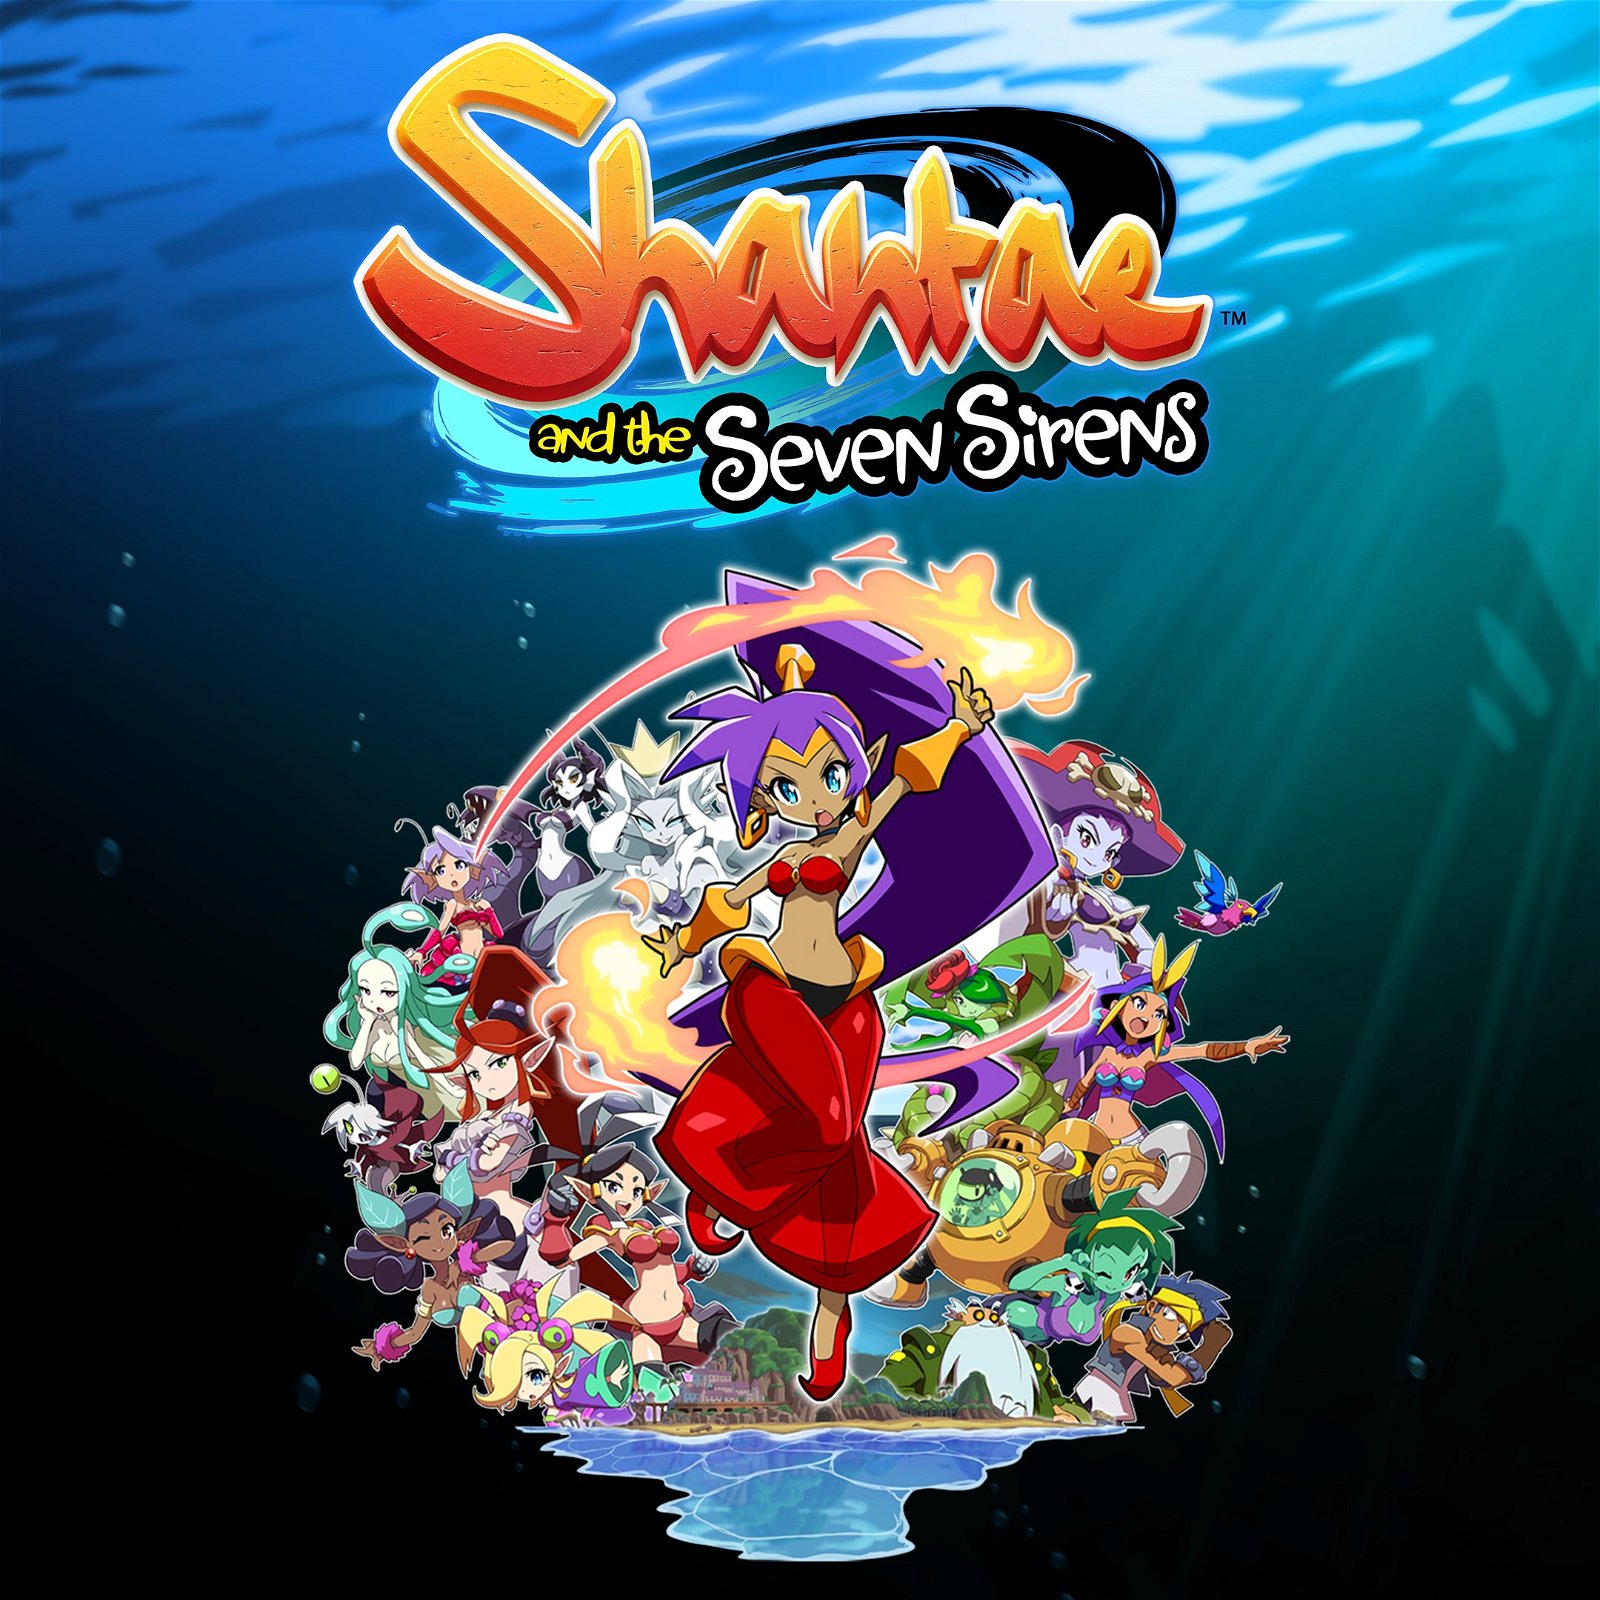 Image of Shantae and the Seven Sirens